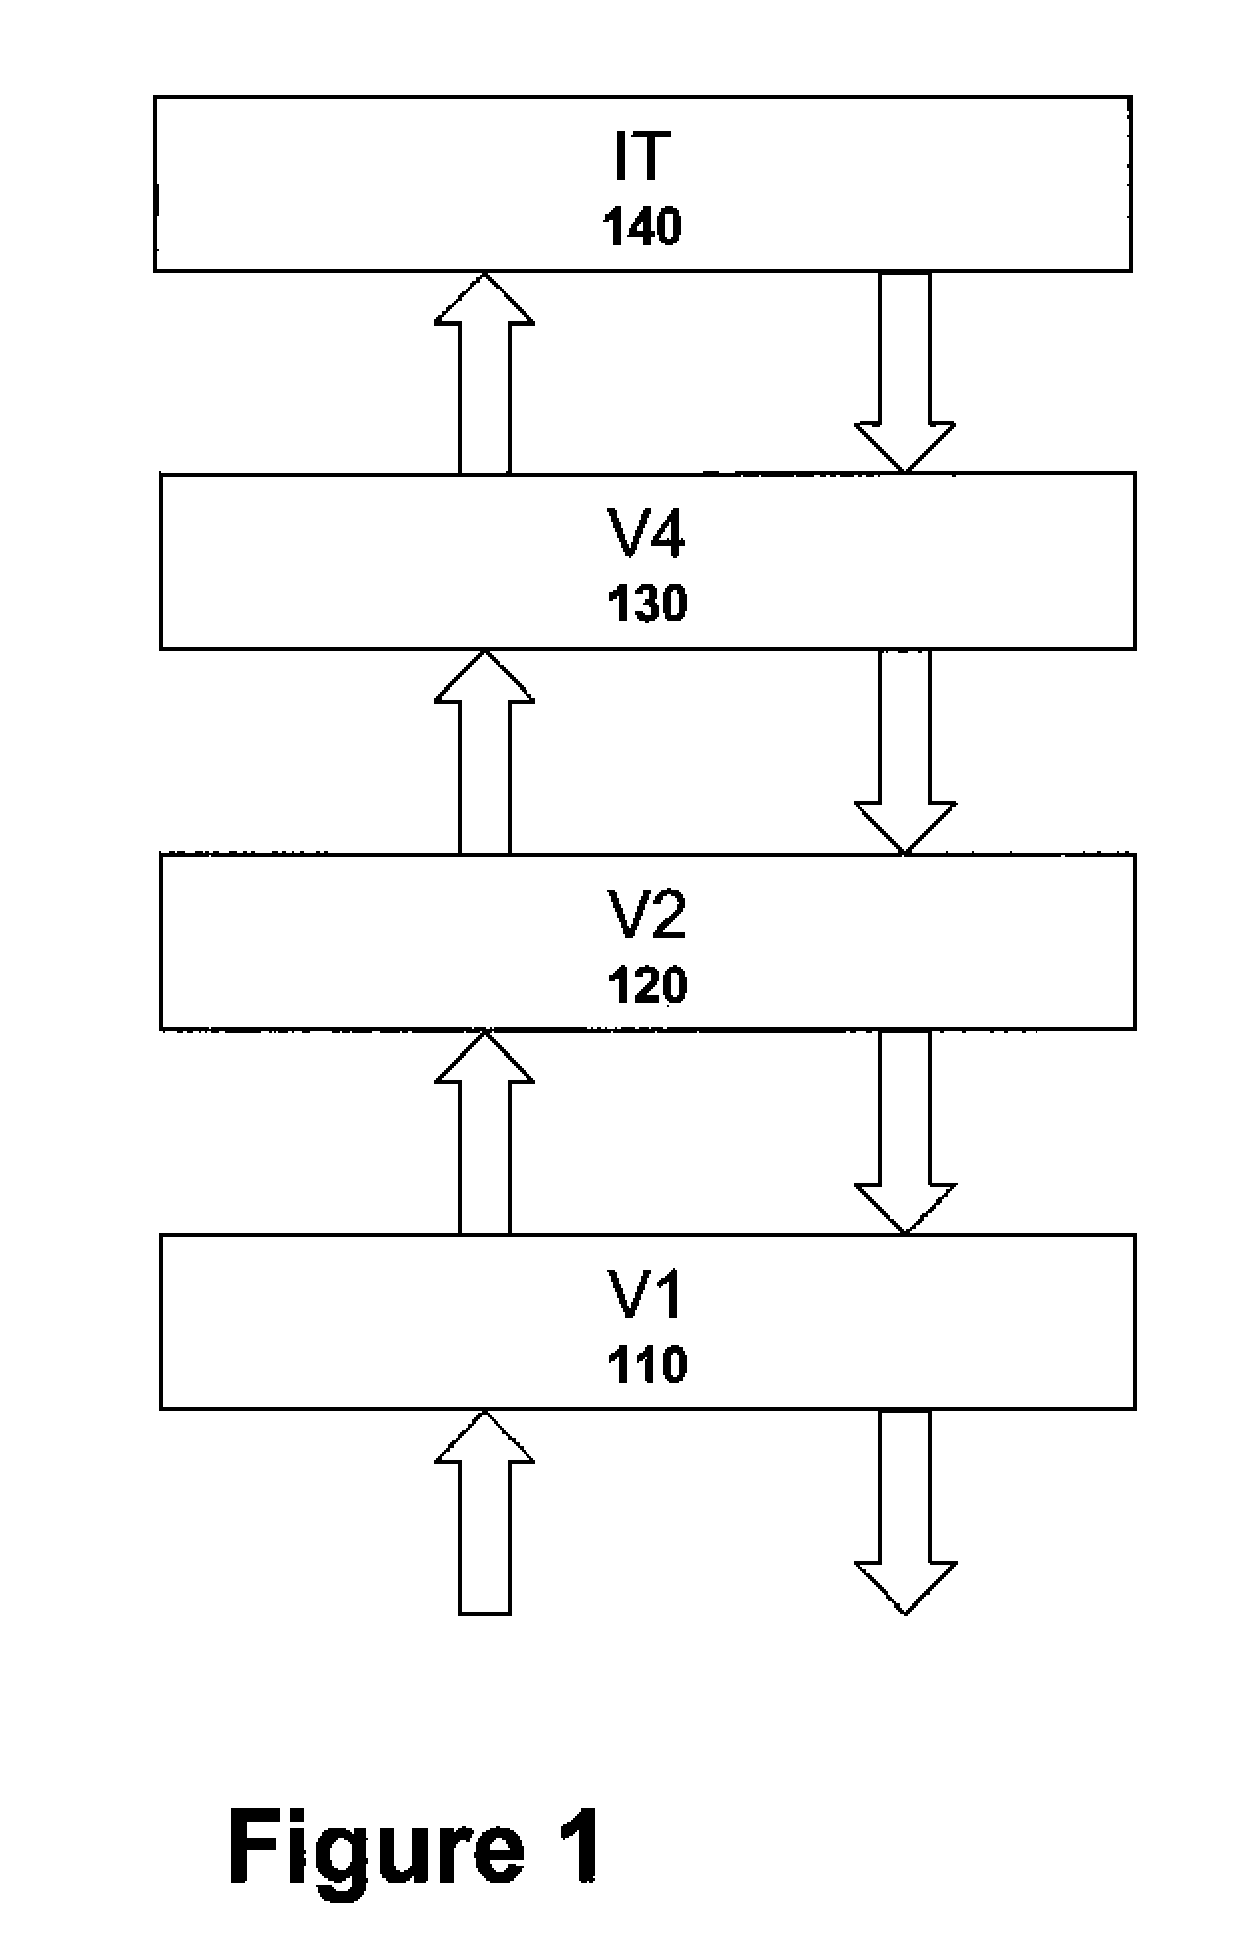 Methods, Architecture, and Apparatus for Implementing Machine Intelligence and Hierarchical Memory Systems